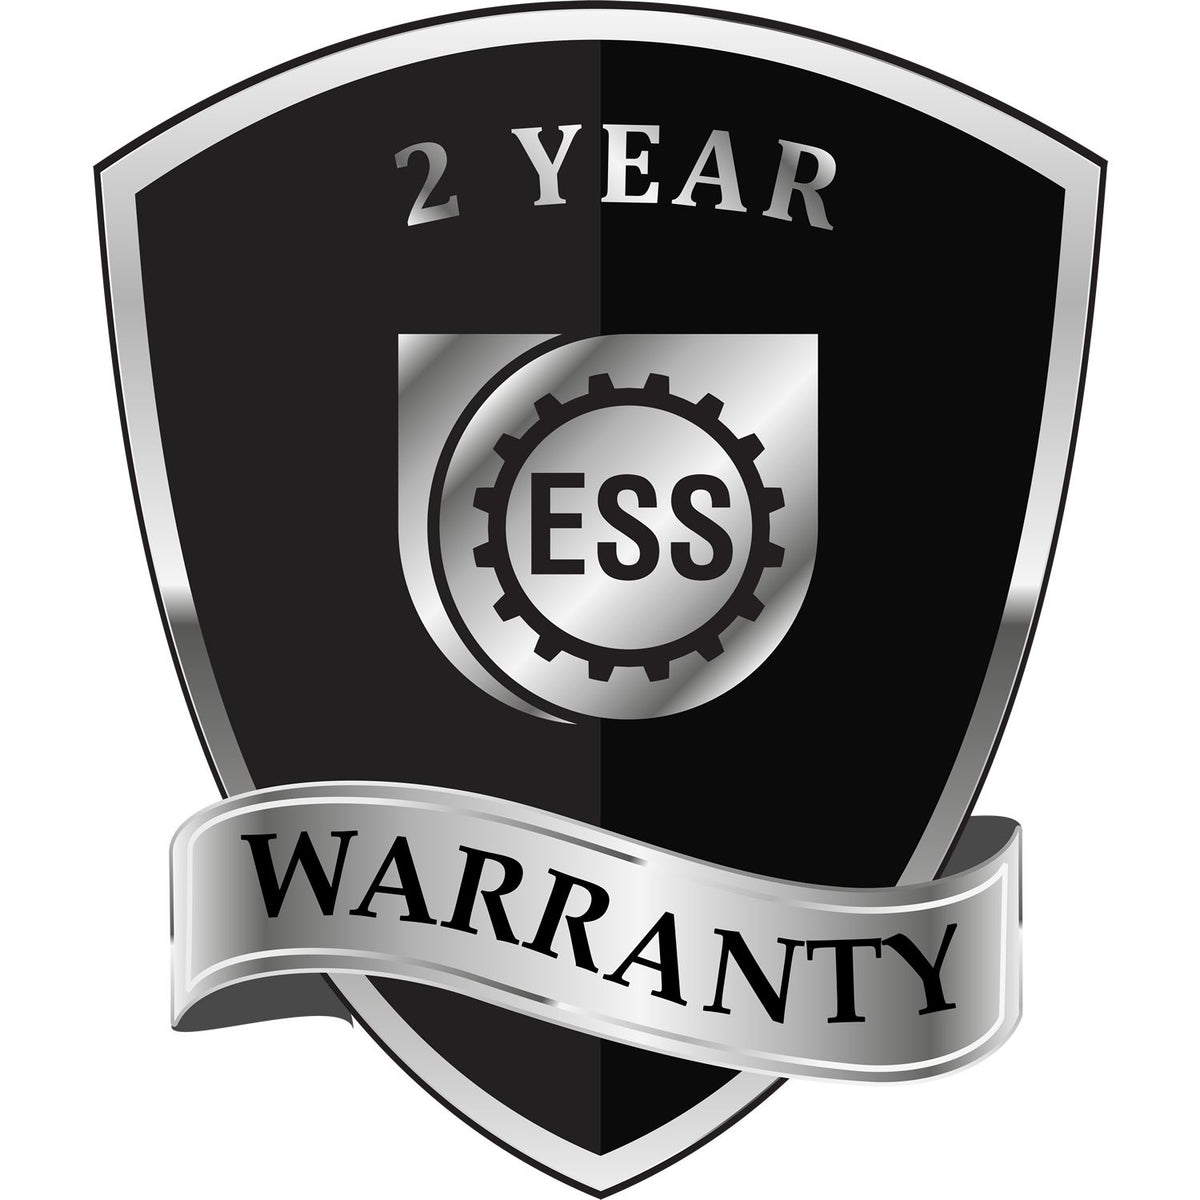 A badge or emblem showing a warranty icon for the Soft Alabama Professional Engineer Seal